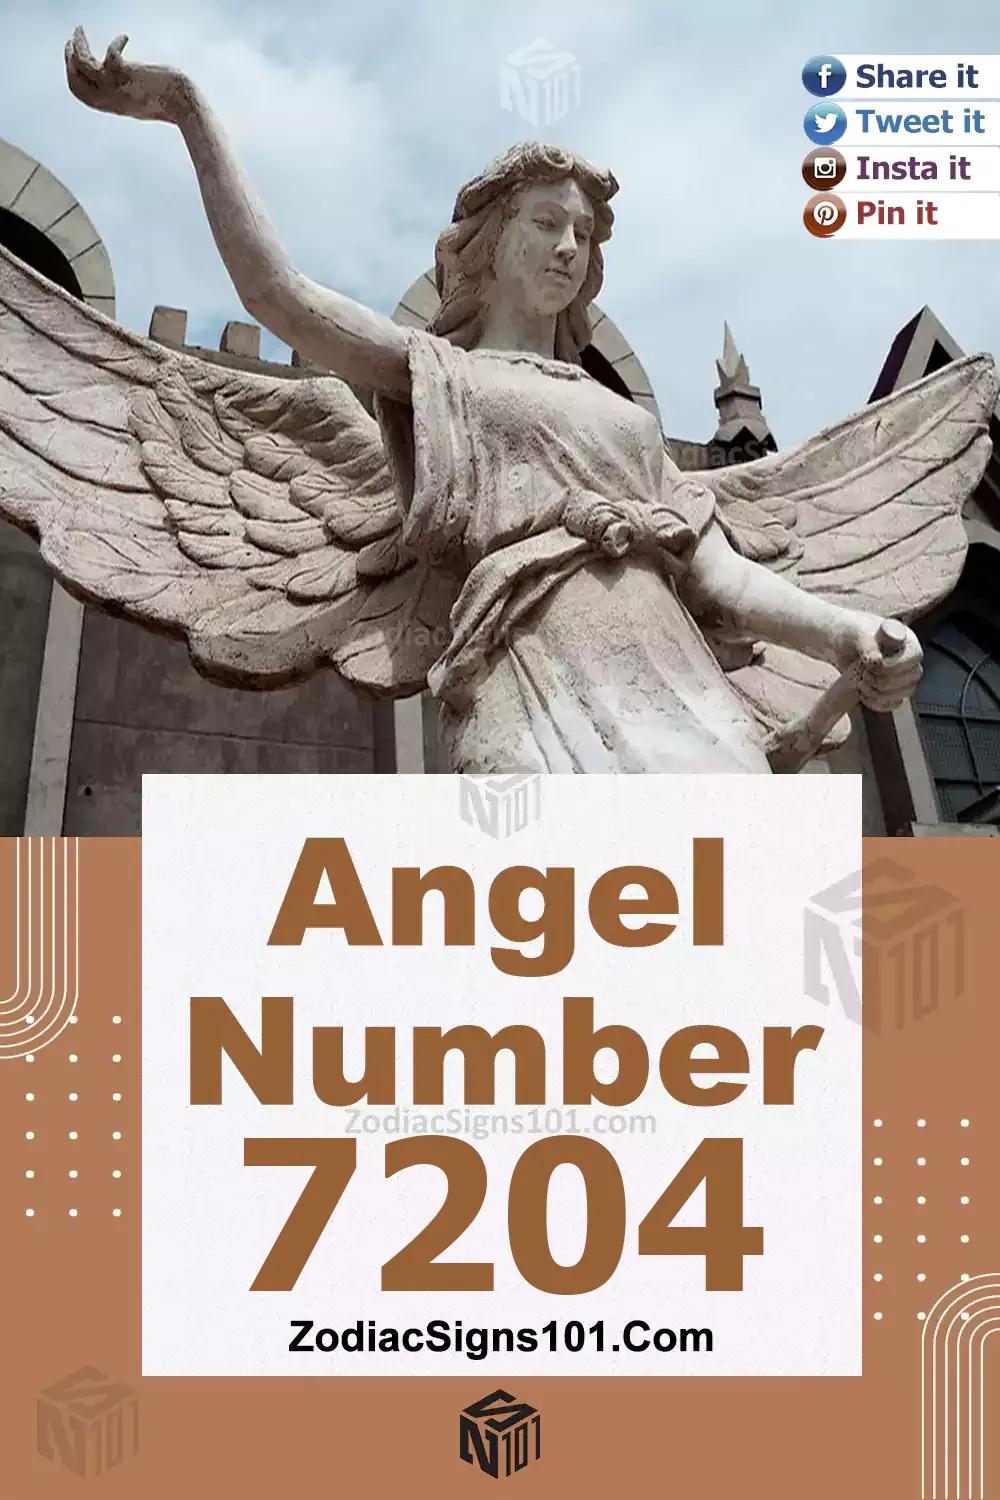 7204 Angel Number Meaning